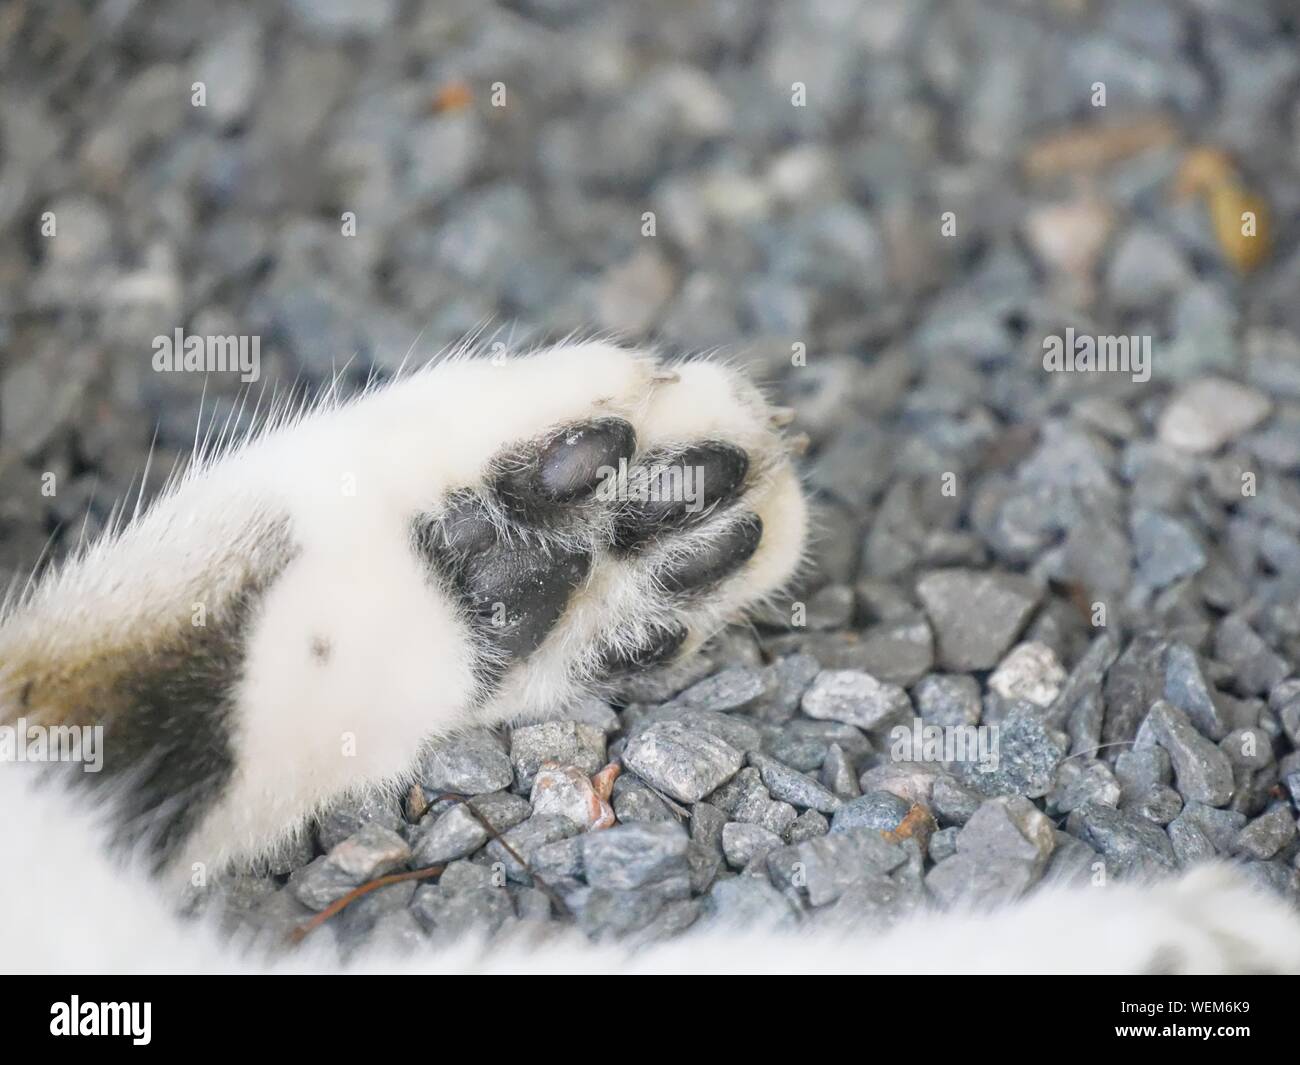 Close up of a cat's paw at the Hemingway house in Key West, Florida. Stock Photo